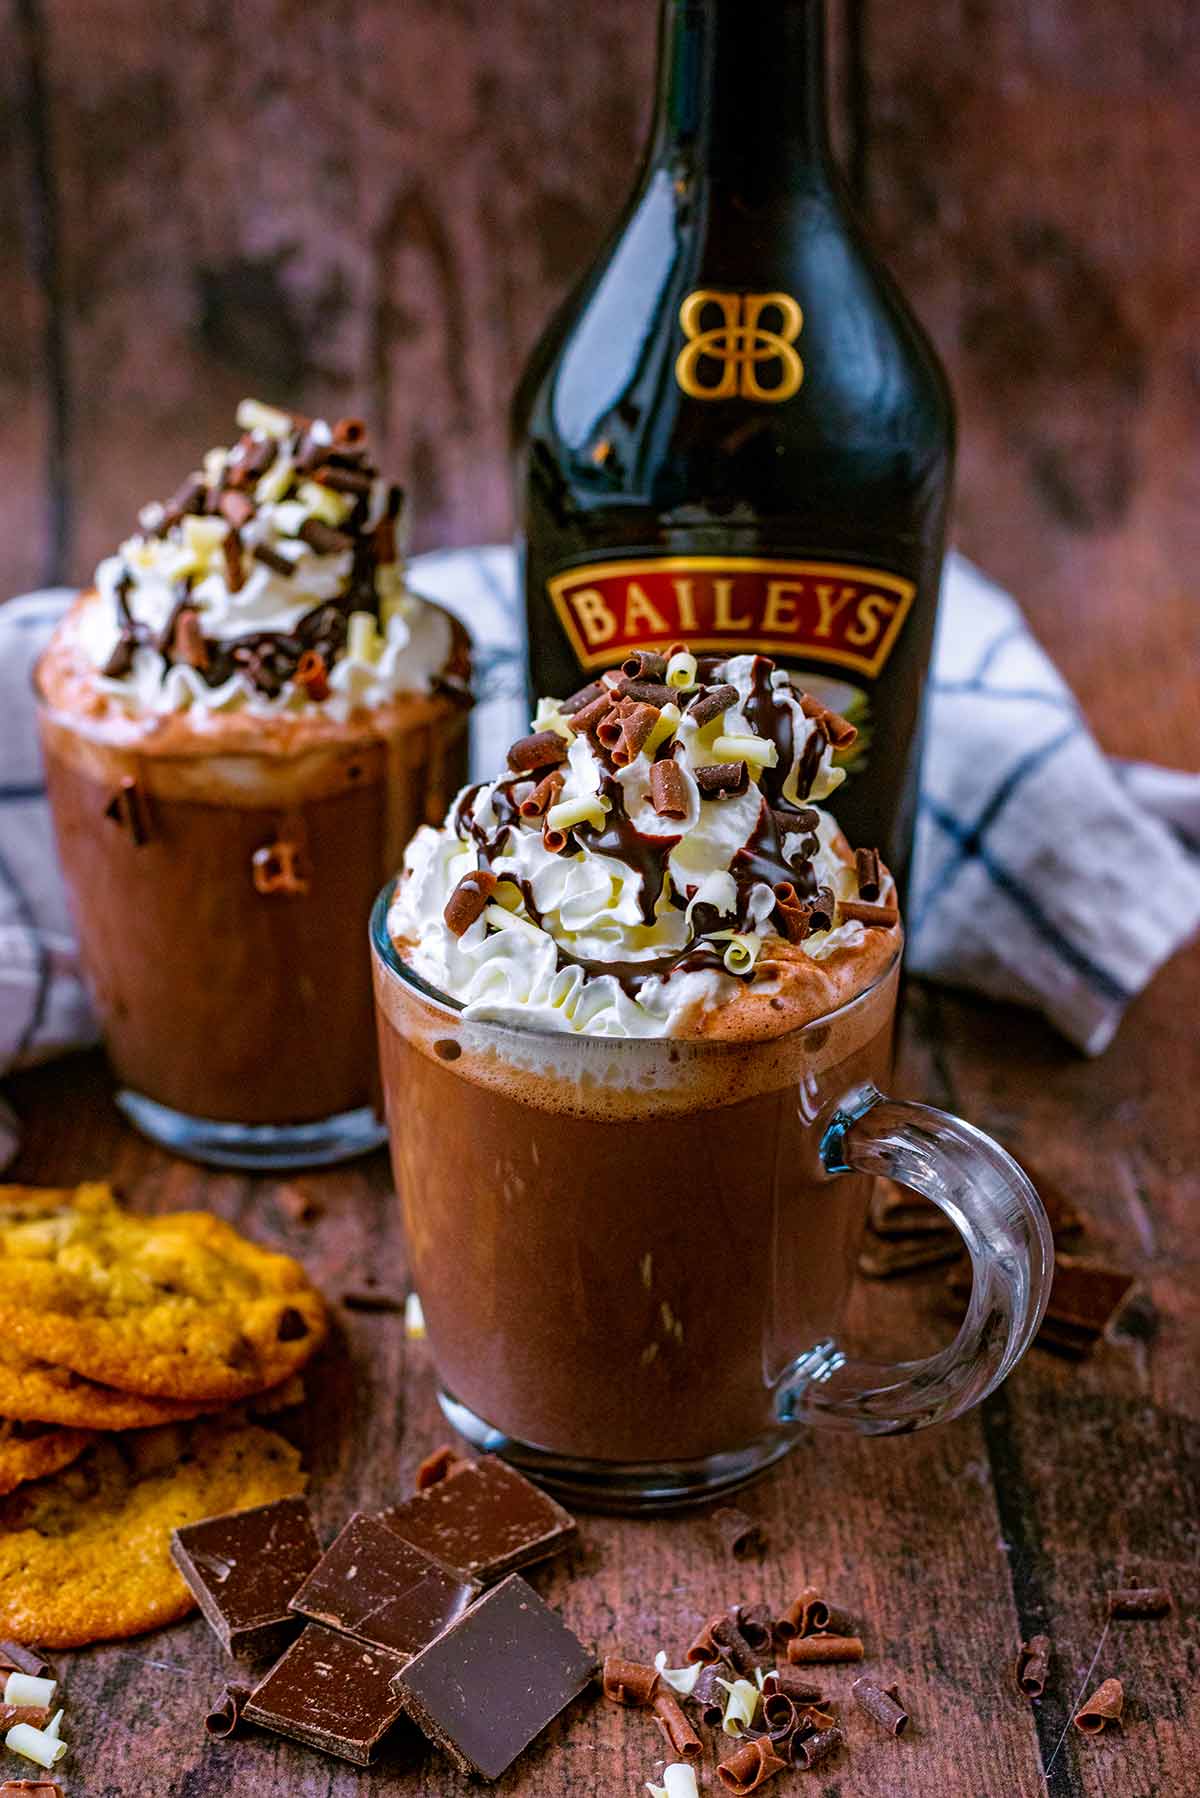 Two glasses of cream topped hot chocolate in front of a bottle of Baileys.